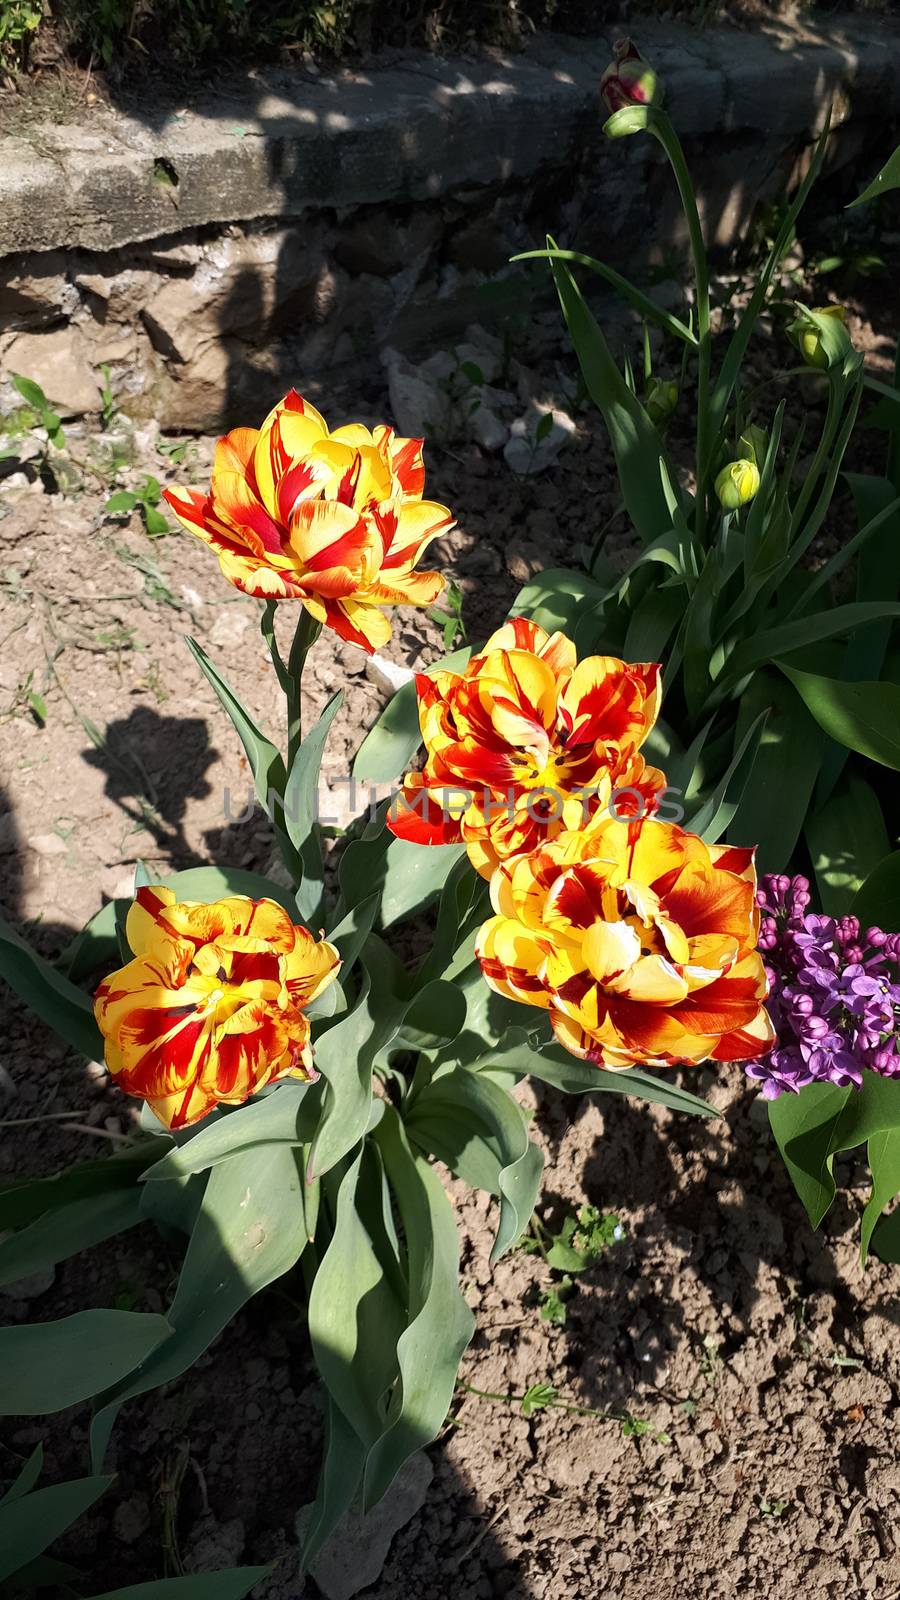 Red-yellow tulips in the flowerbed at the fence